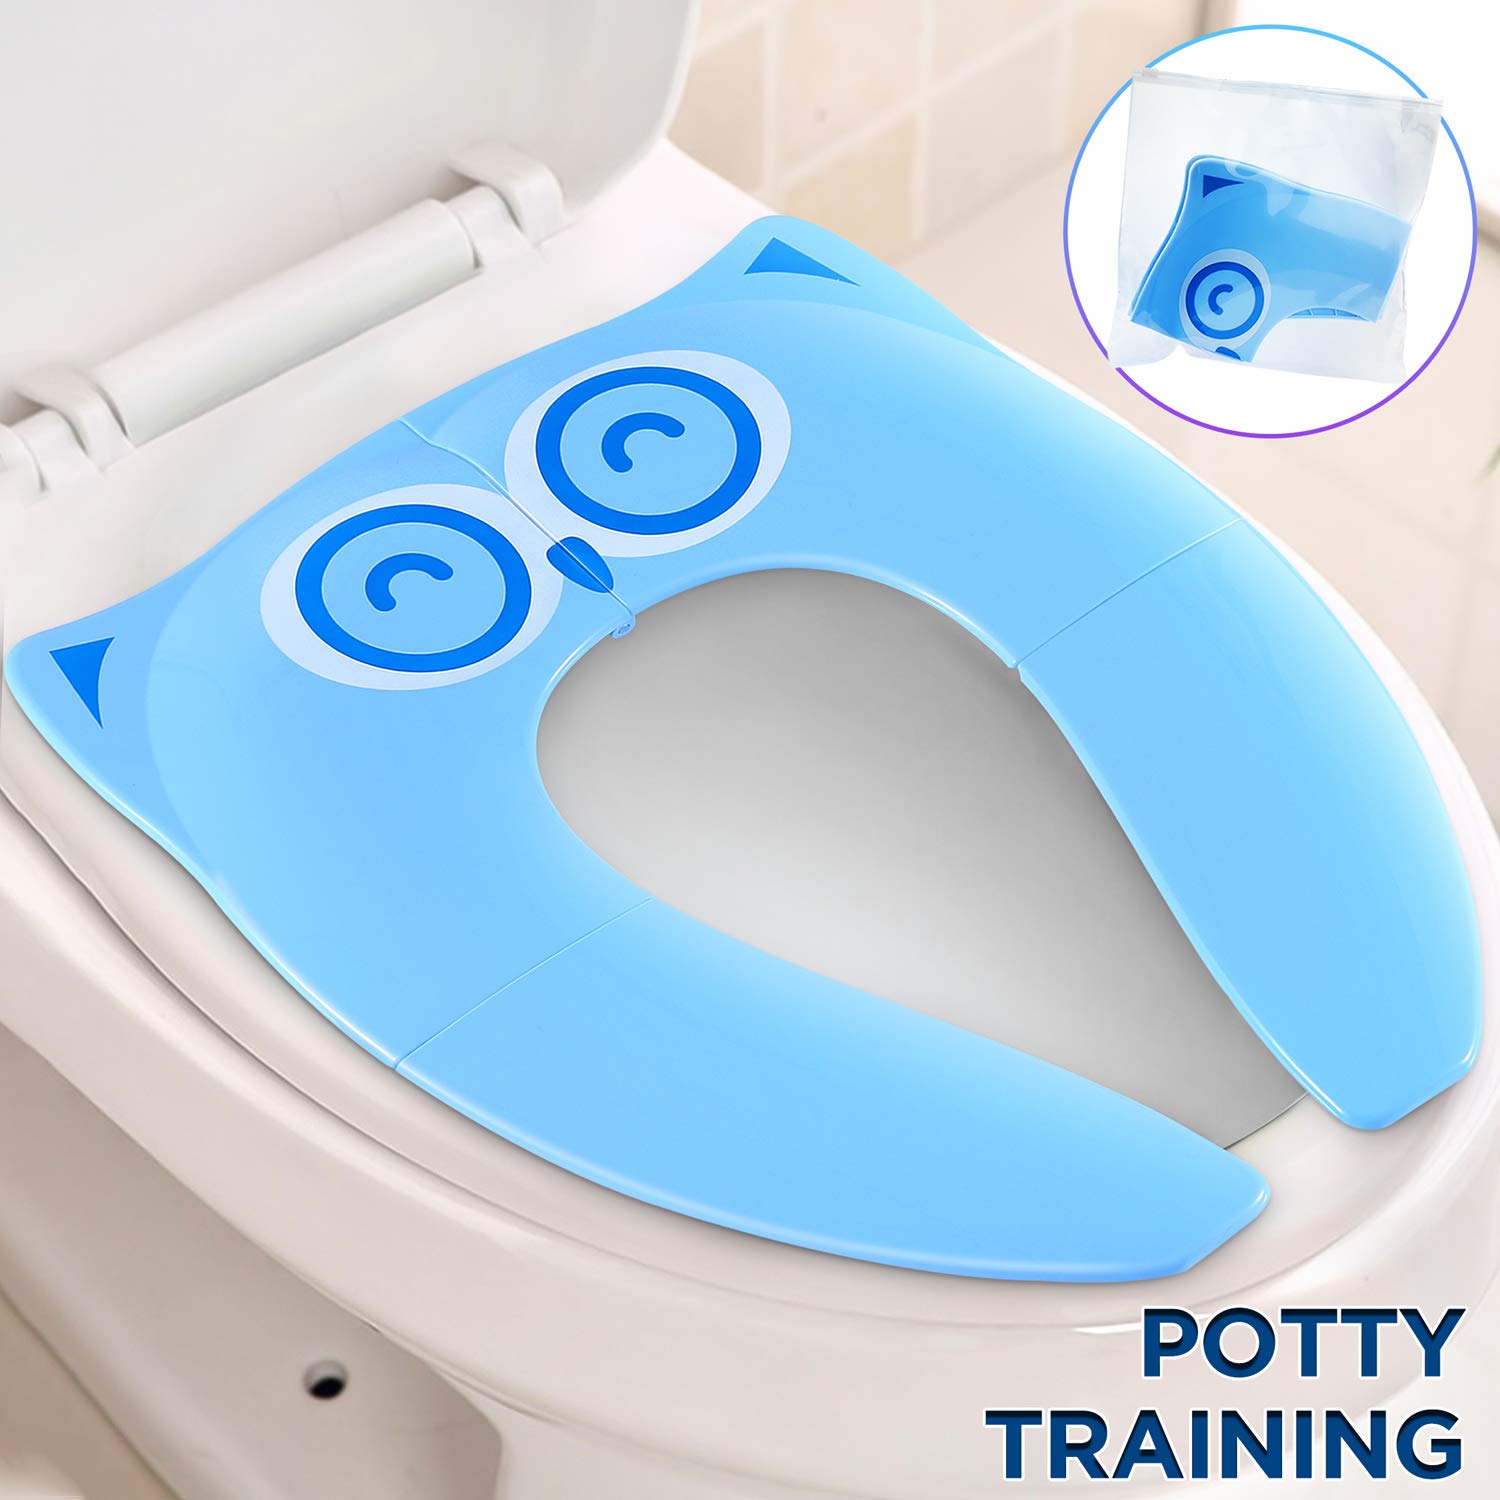 Toddler Portable Potty Trainer Seat for Toilet Kids Travel Potty Training Toilet Seat Backrest Adjustable Disassembly Anti Slip Design by Angol Shiold 